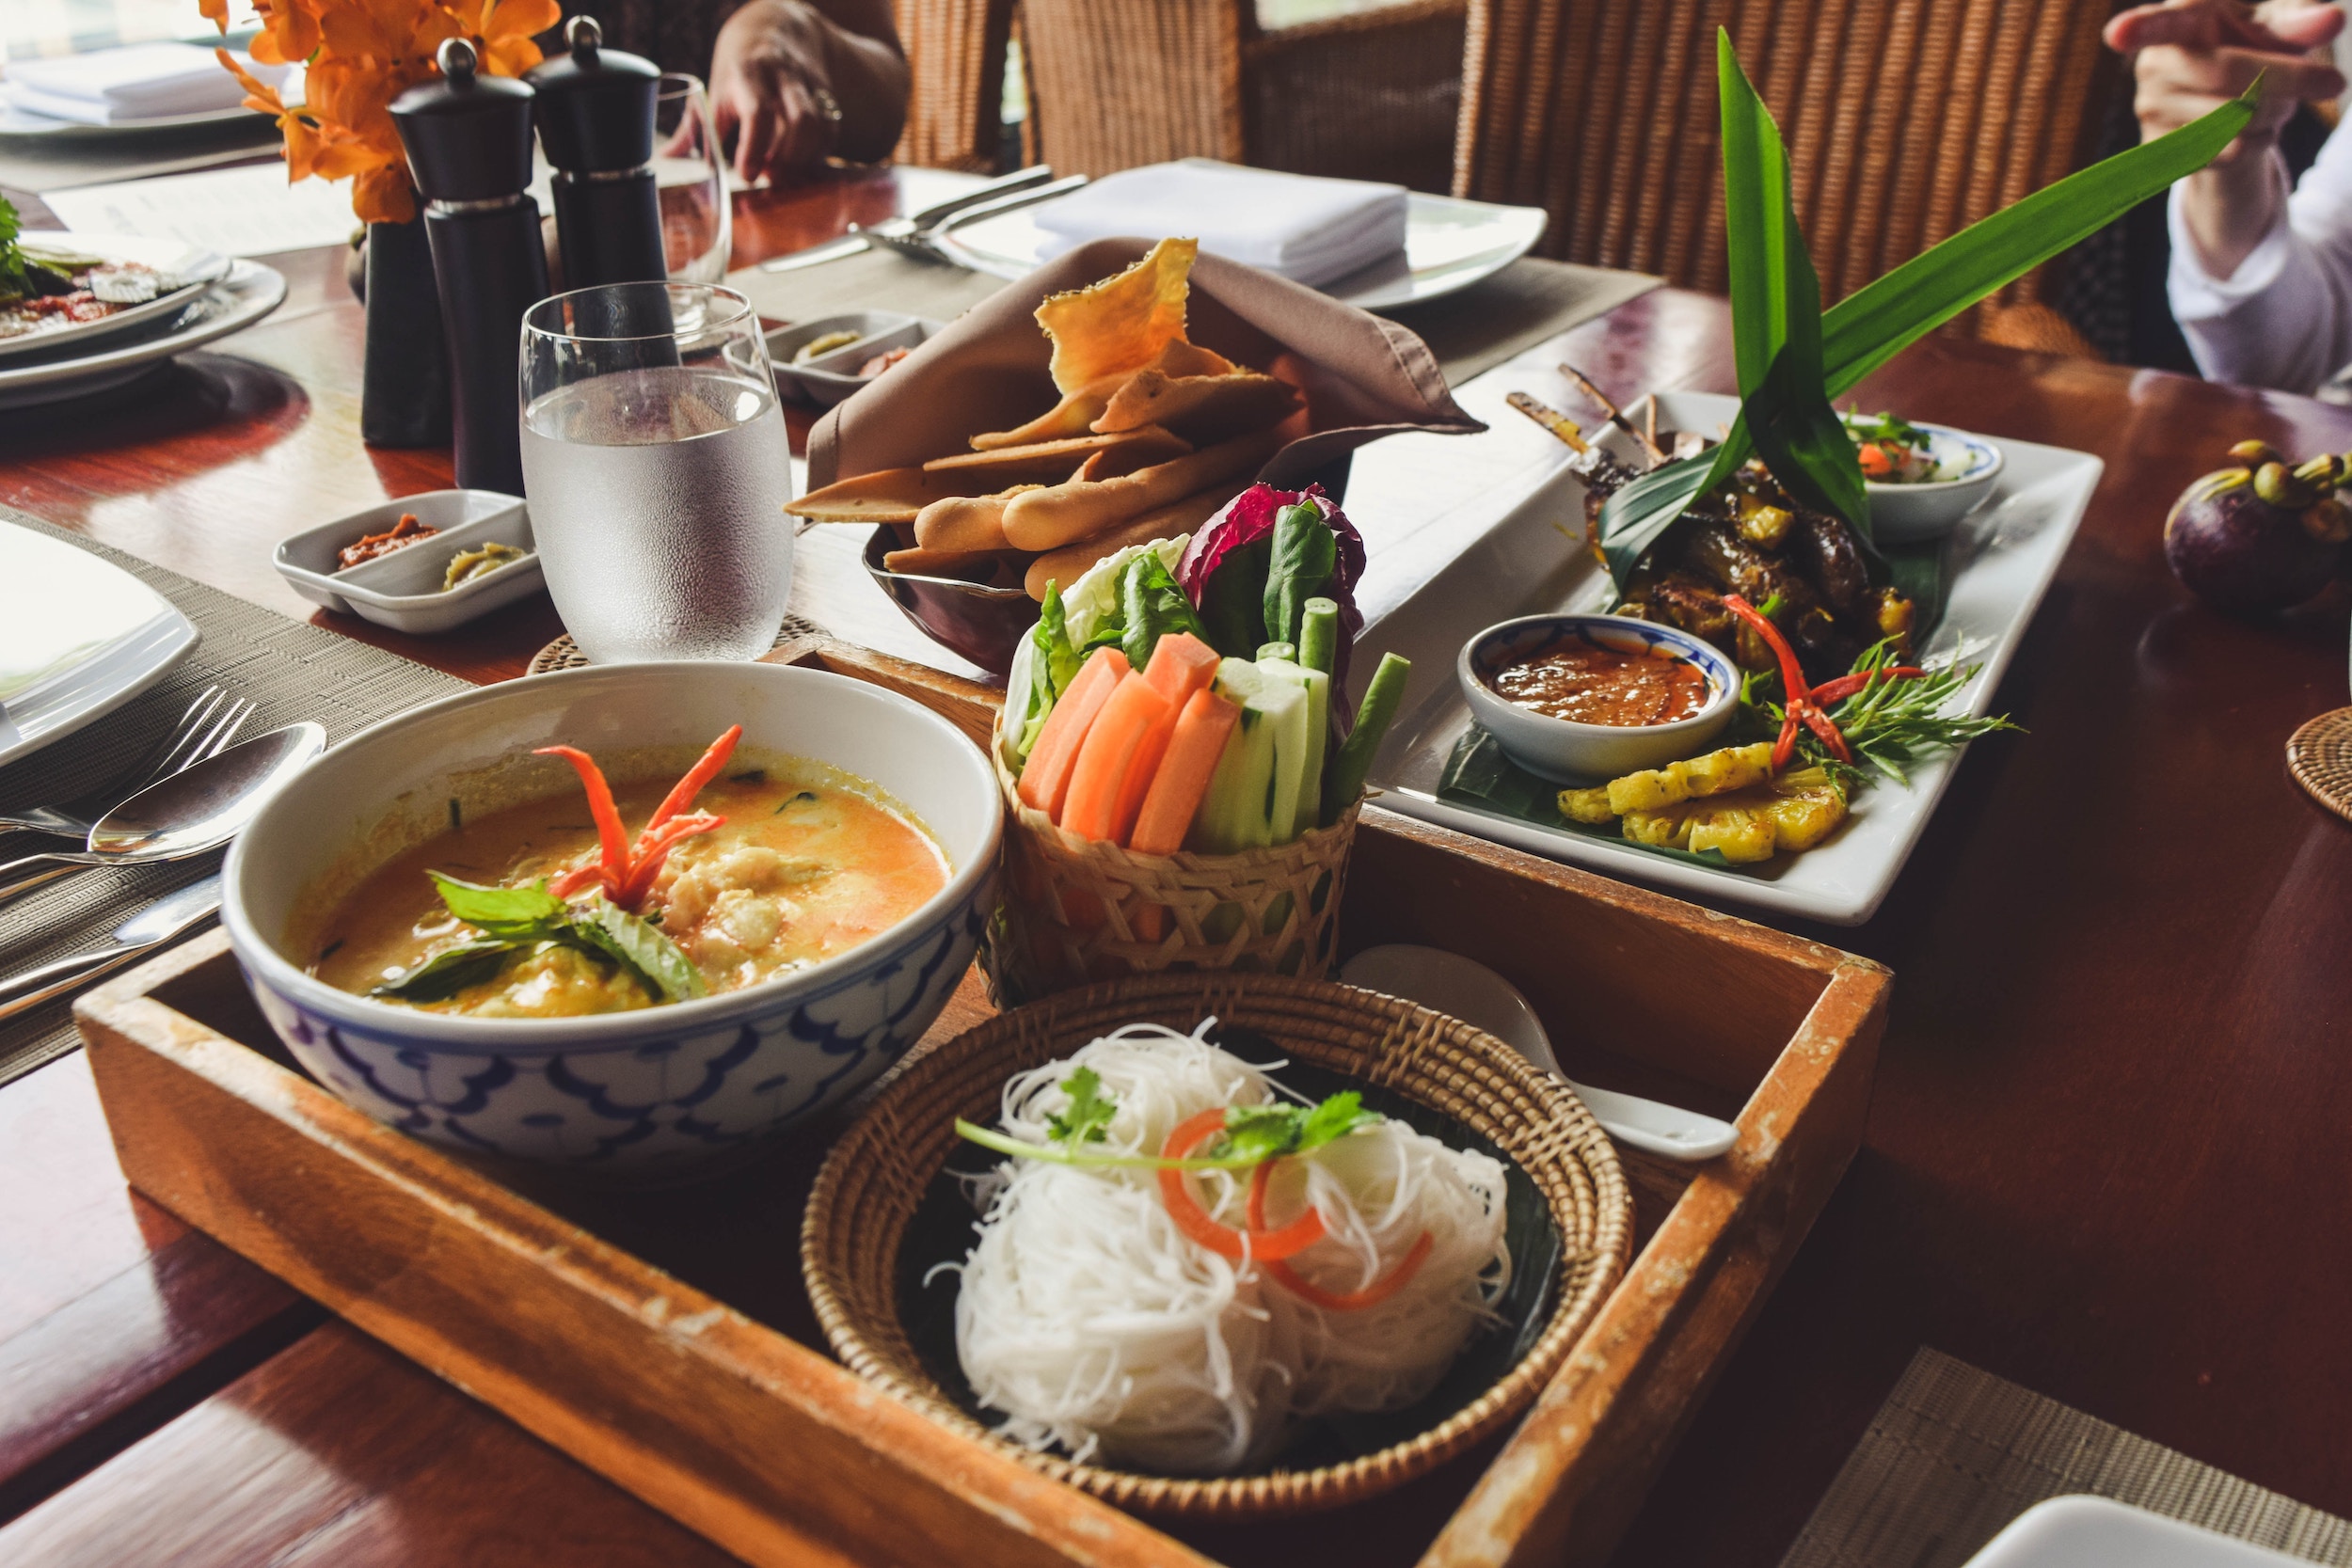 Thai cuisine is a favourite in the UK and even better in Thailand.